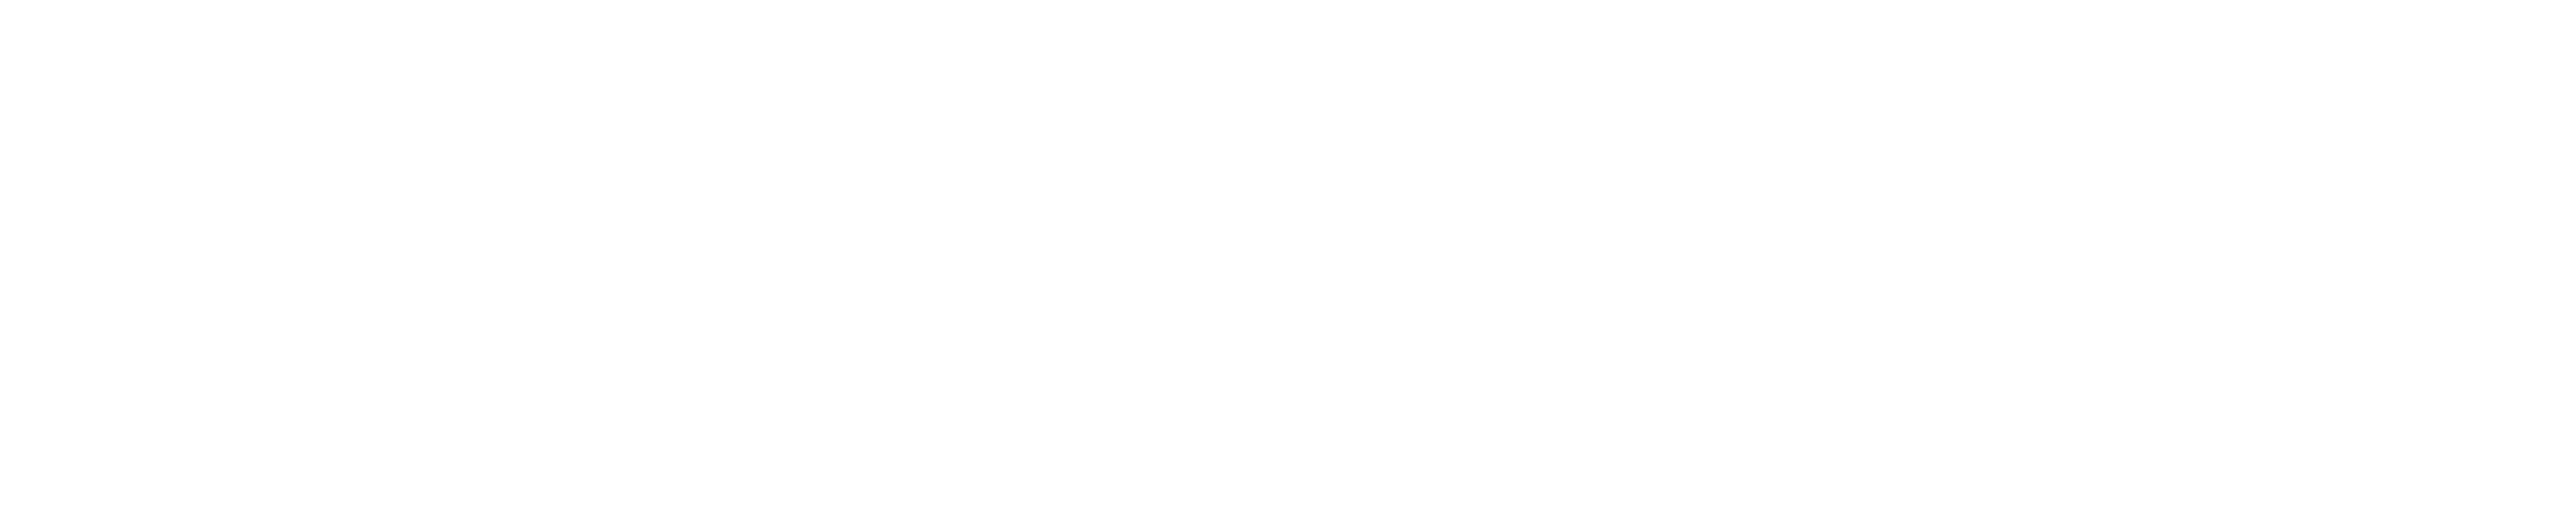 Recollection Films Logo Full Size White